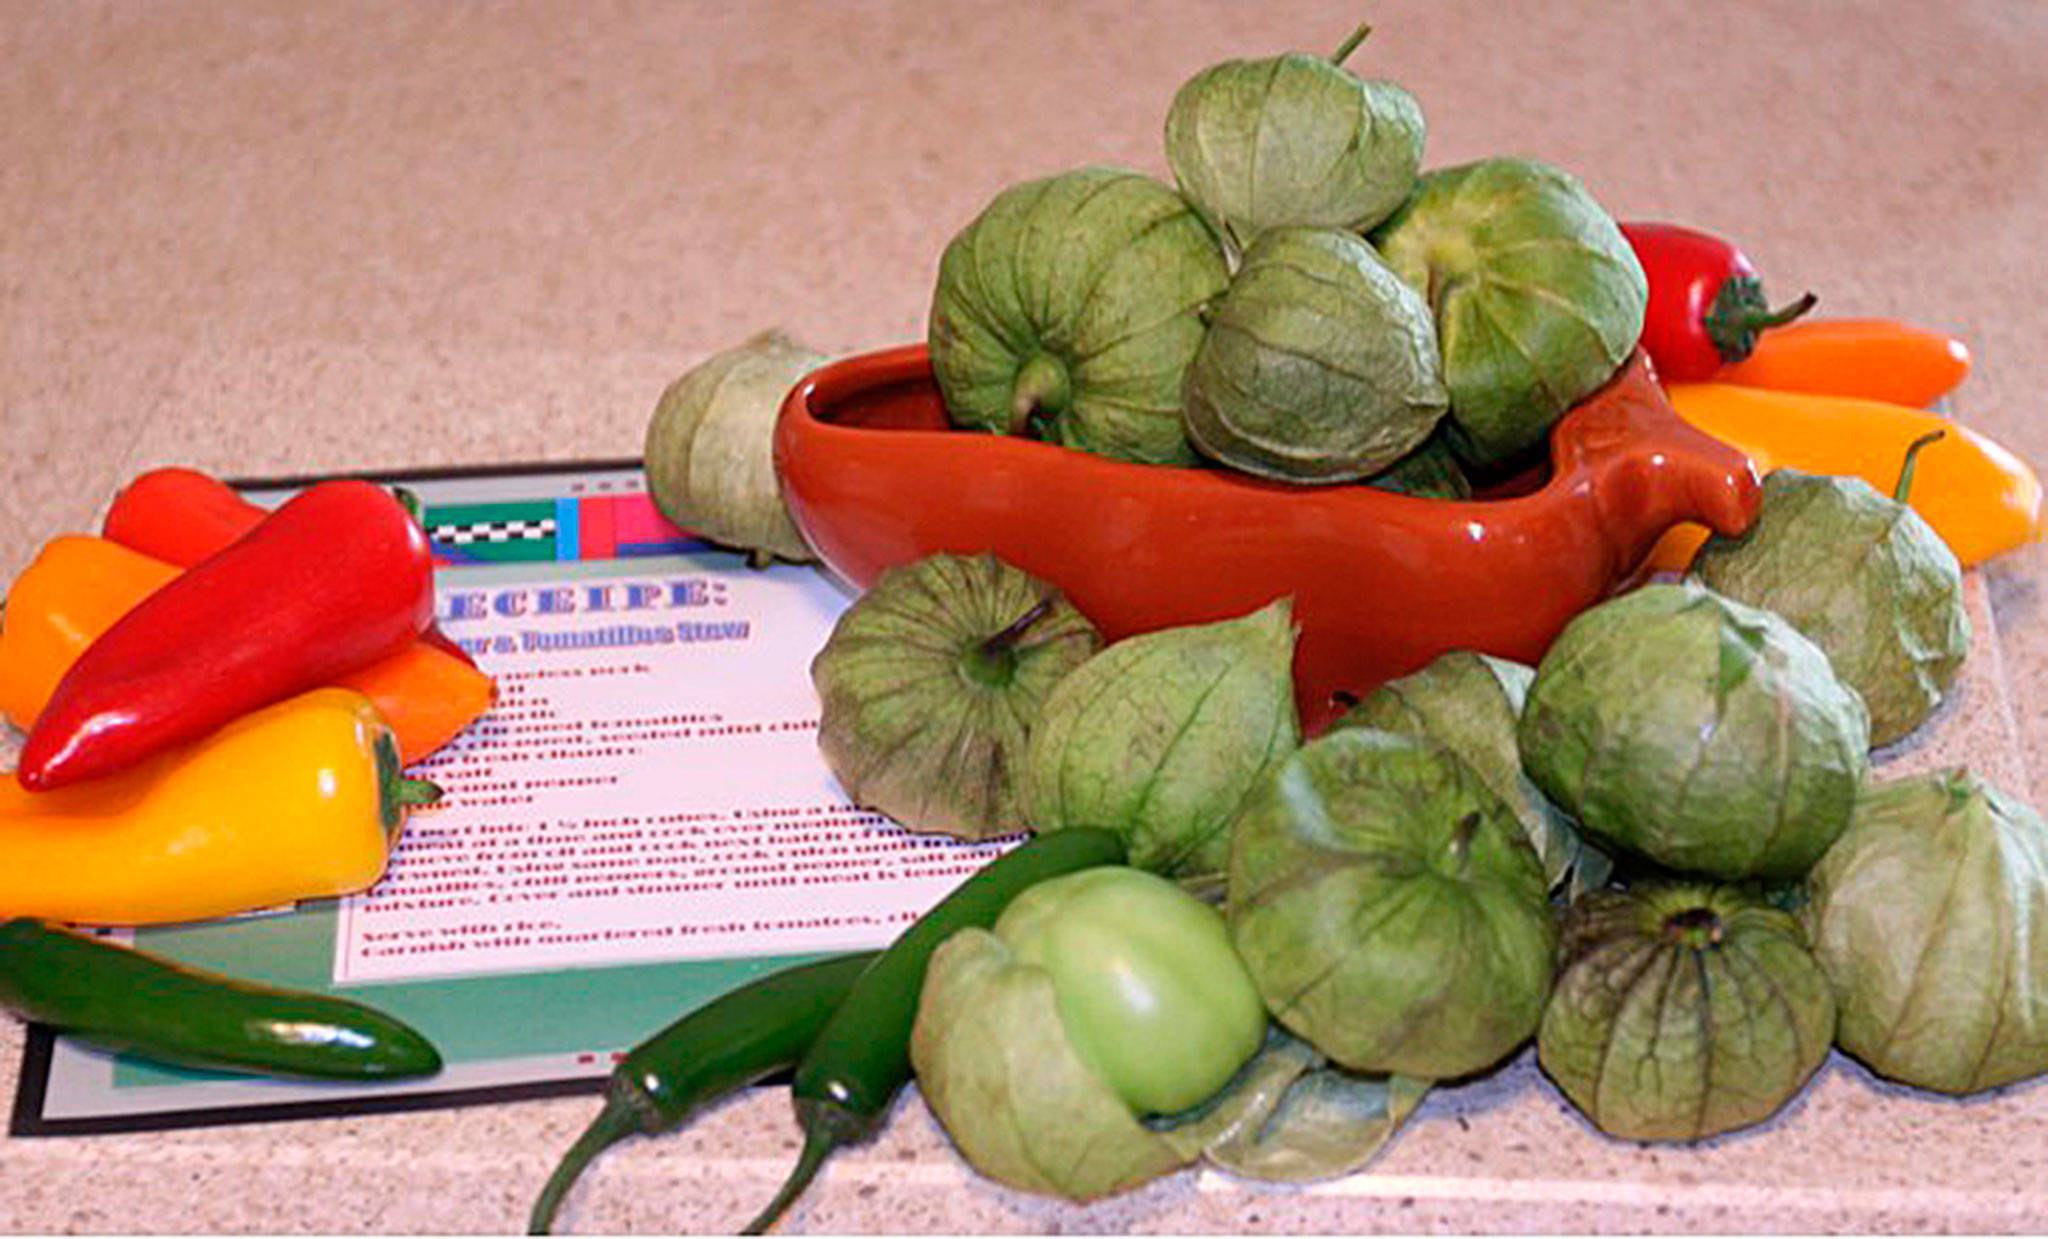 Get It Growing: Tomatillos and peppers